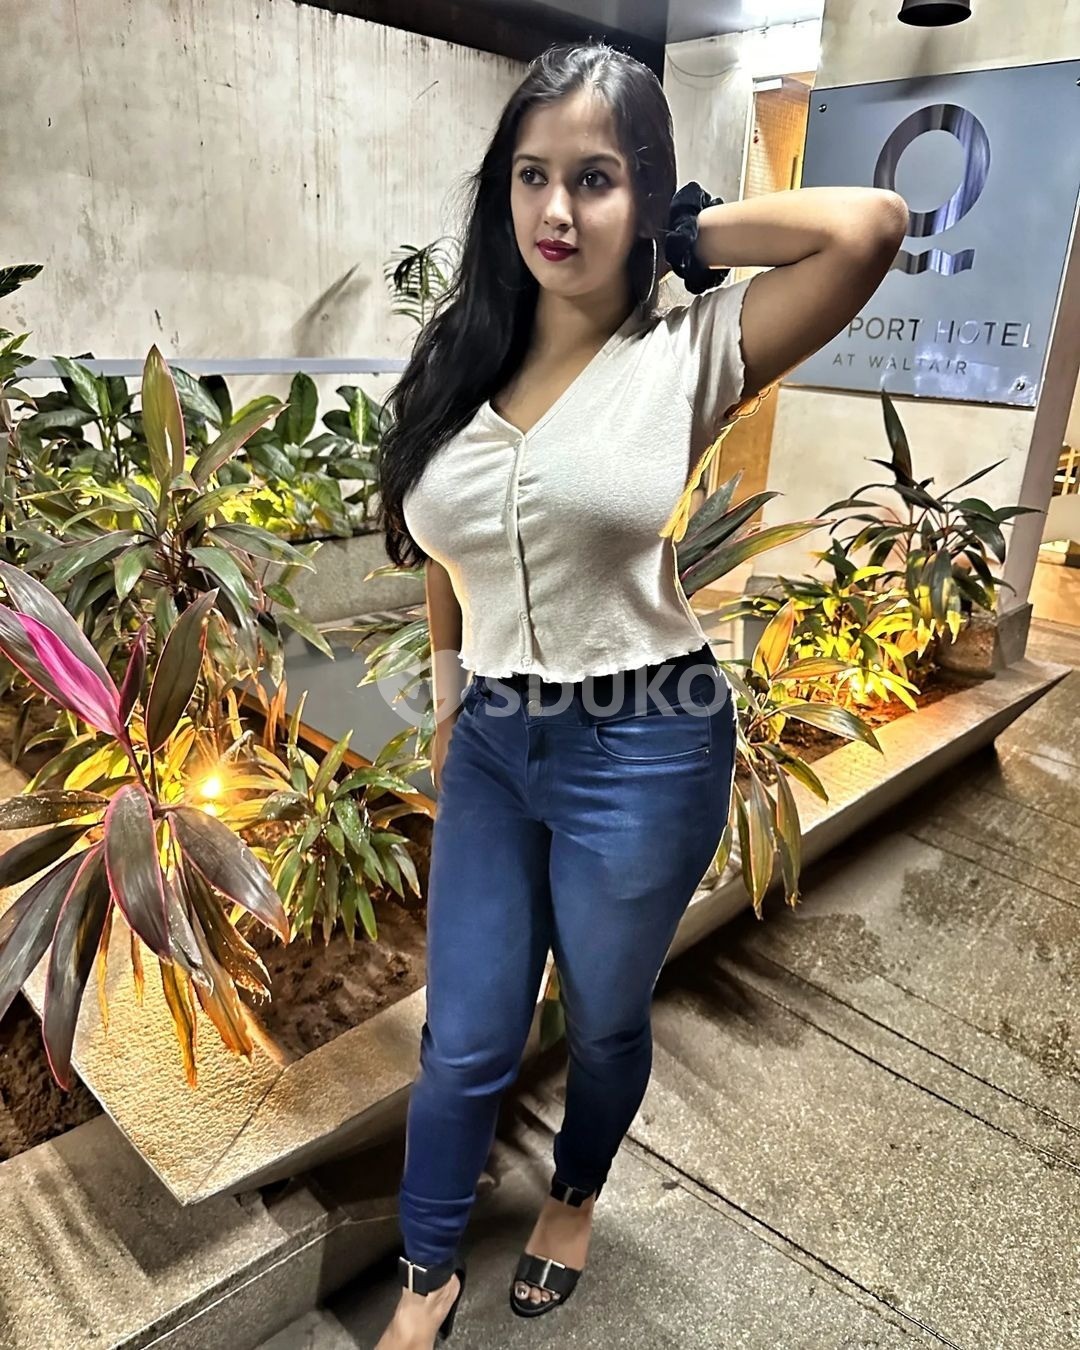 YEXI BEST ESCORT JUHU GENUINE PRICE FULLY SATISFYING MODEL CLG GIRL HOUSEWIFE HOT AND SEXY AVAILABLE ALL OVER MUMBAI